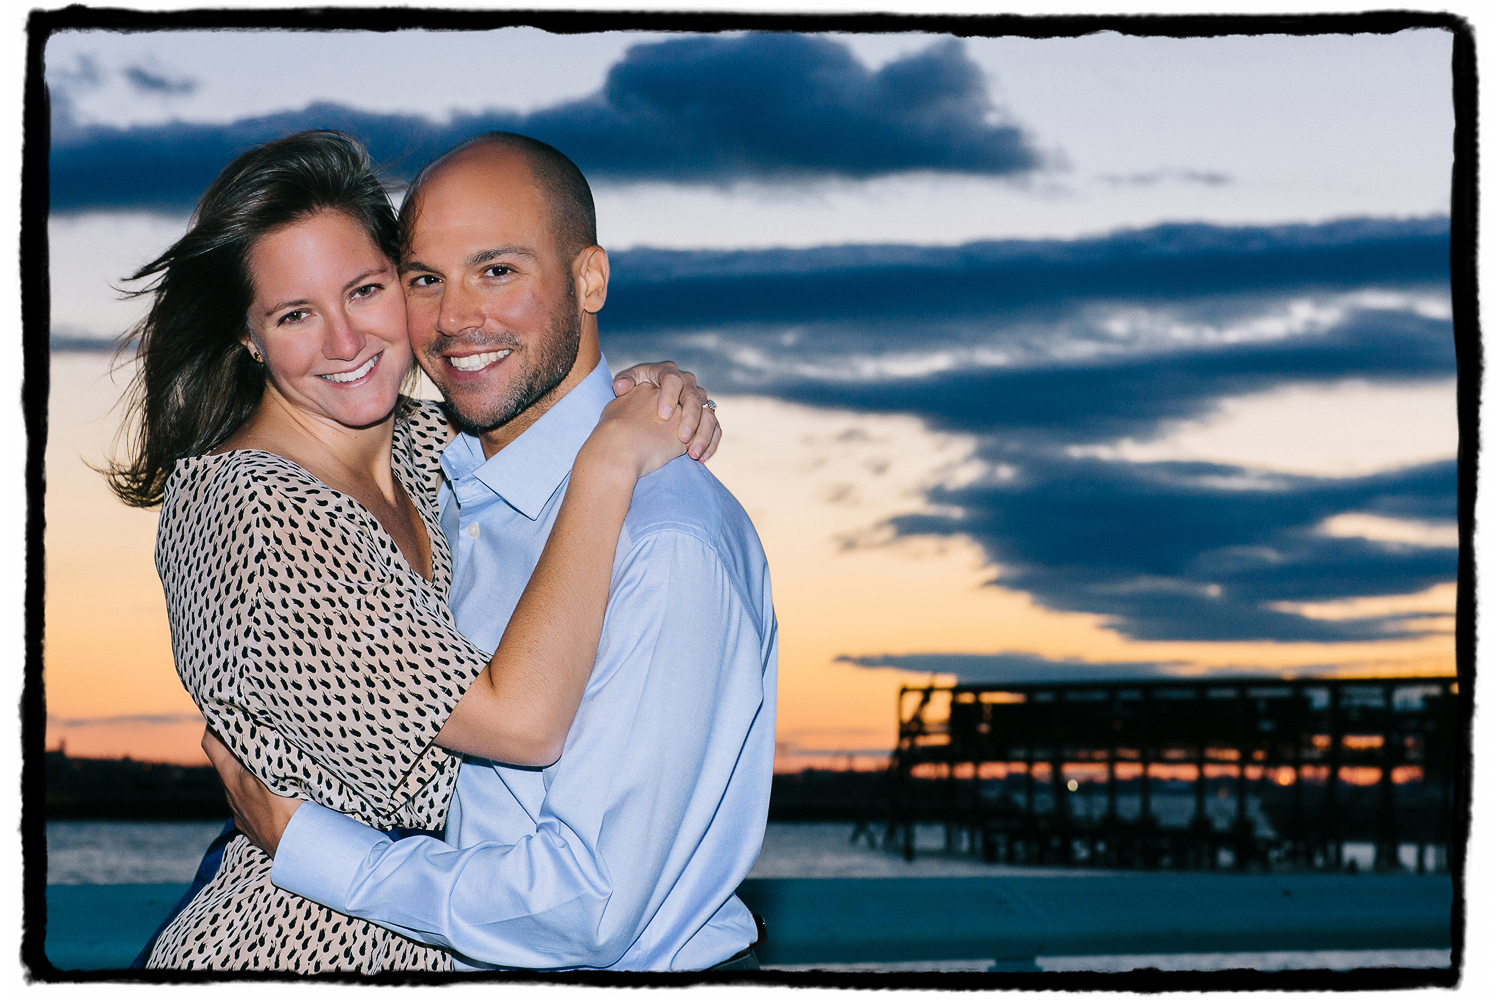 Engagement Portrait: Laura & Joel enjoy the sunset views from the Red Hook waterfront.